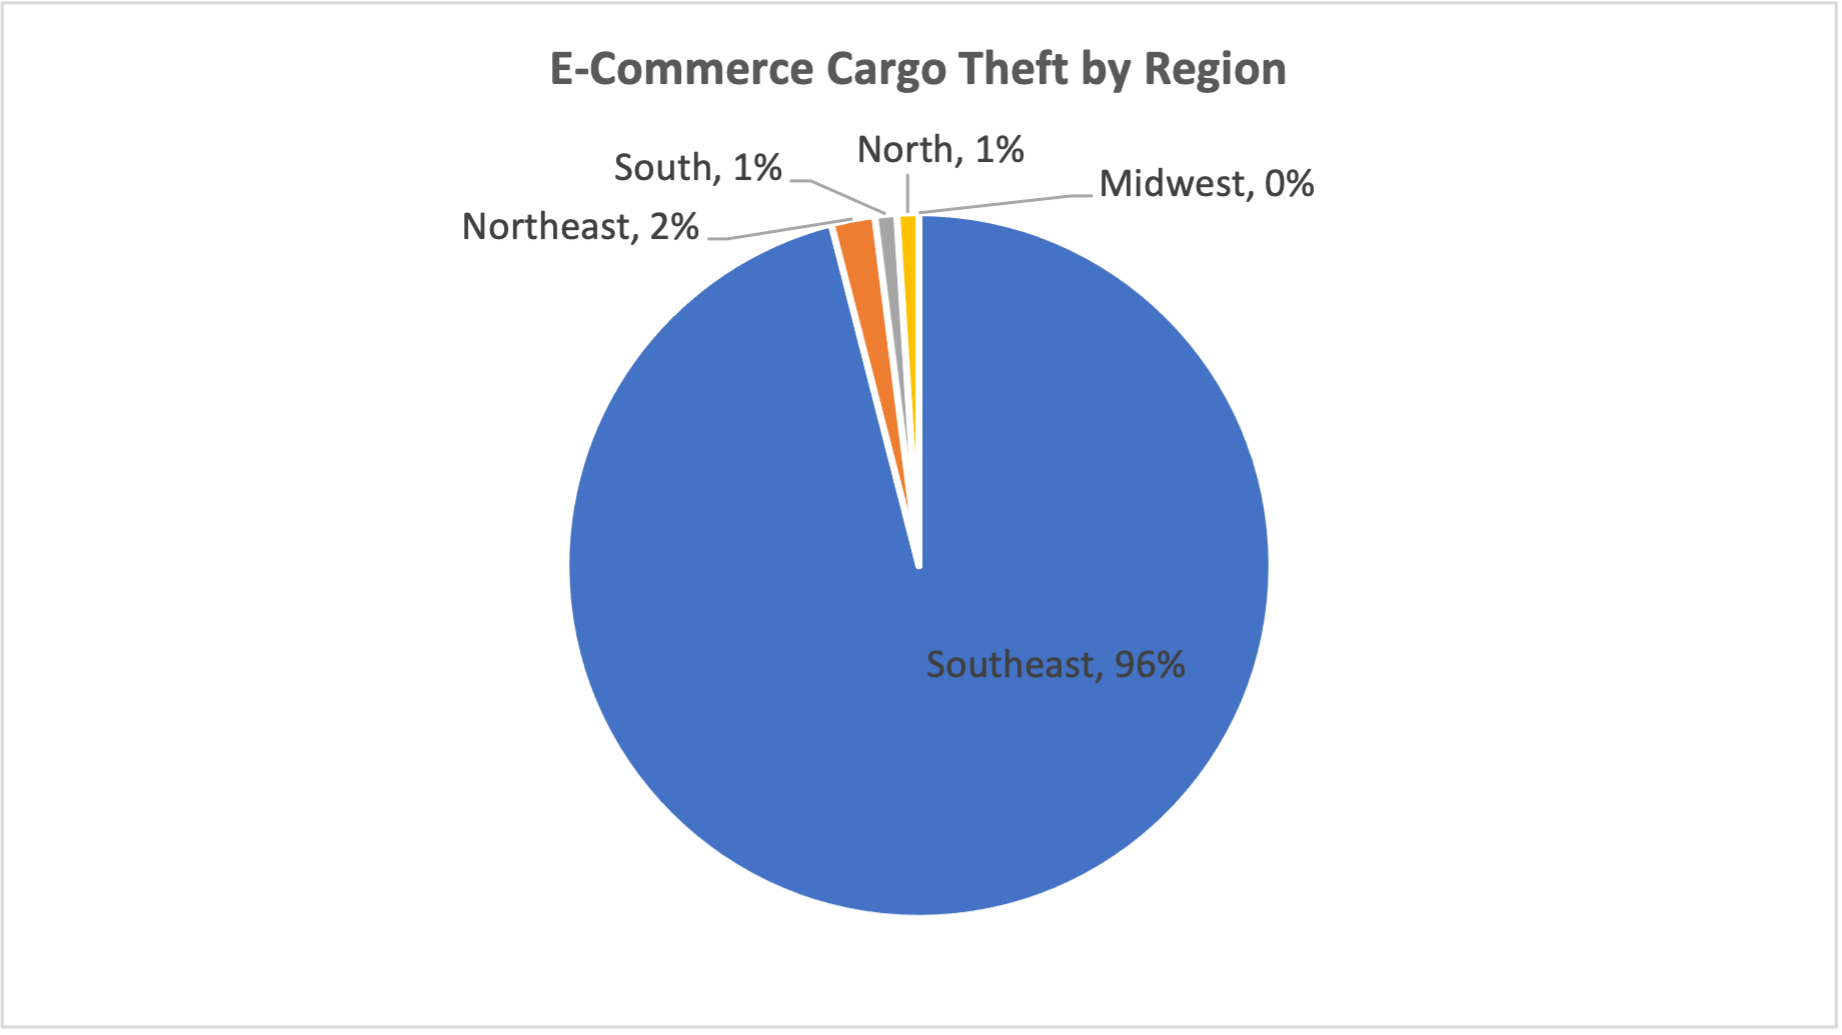 E-commerce cargo theft by region.